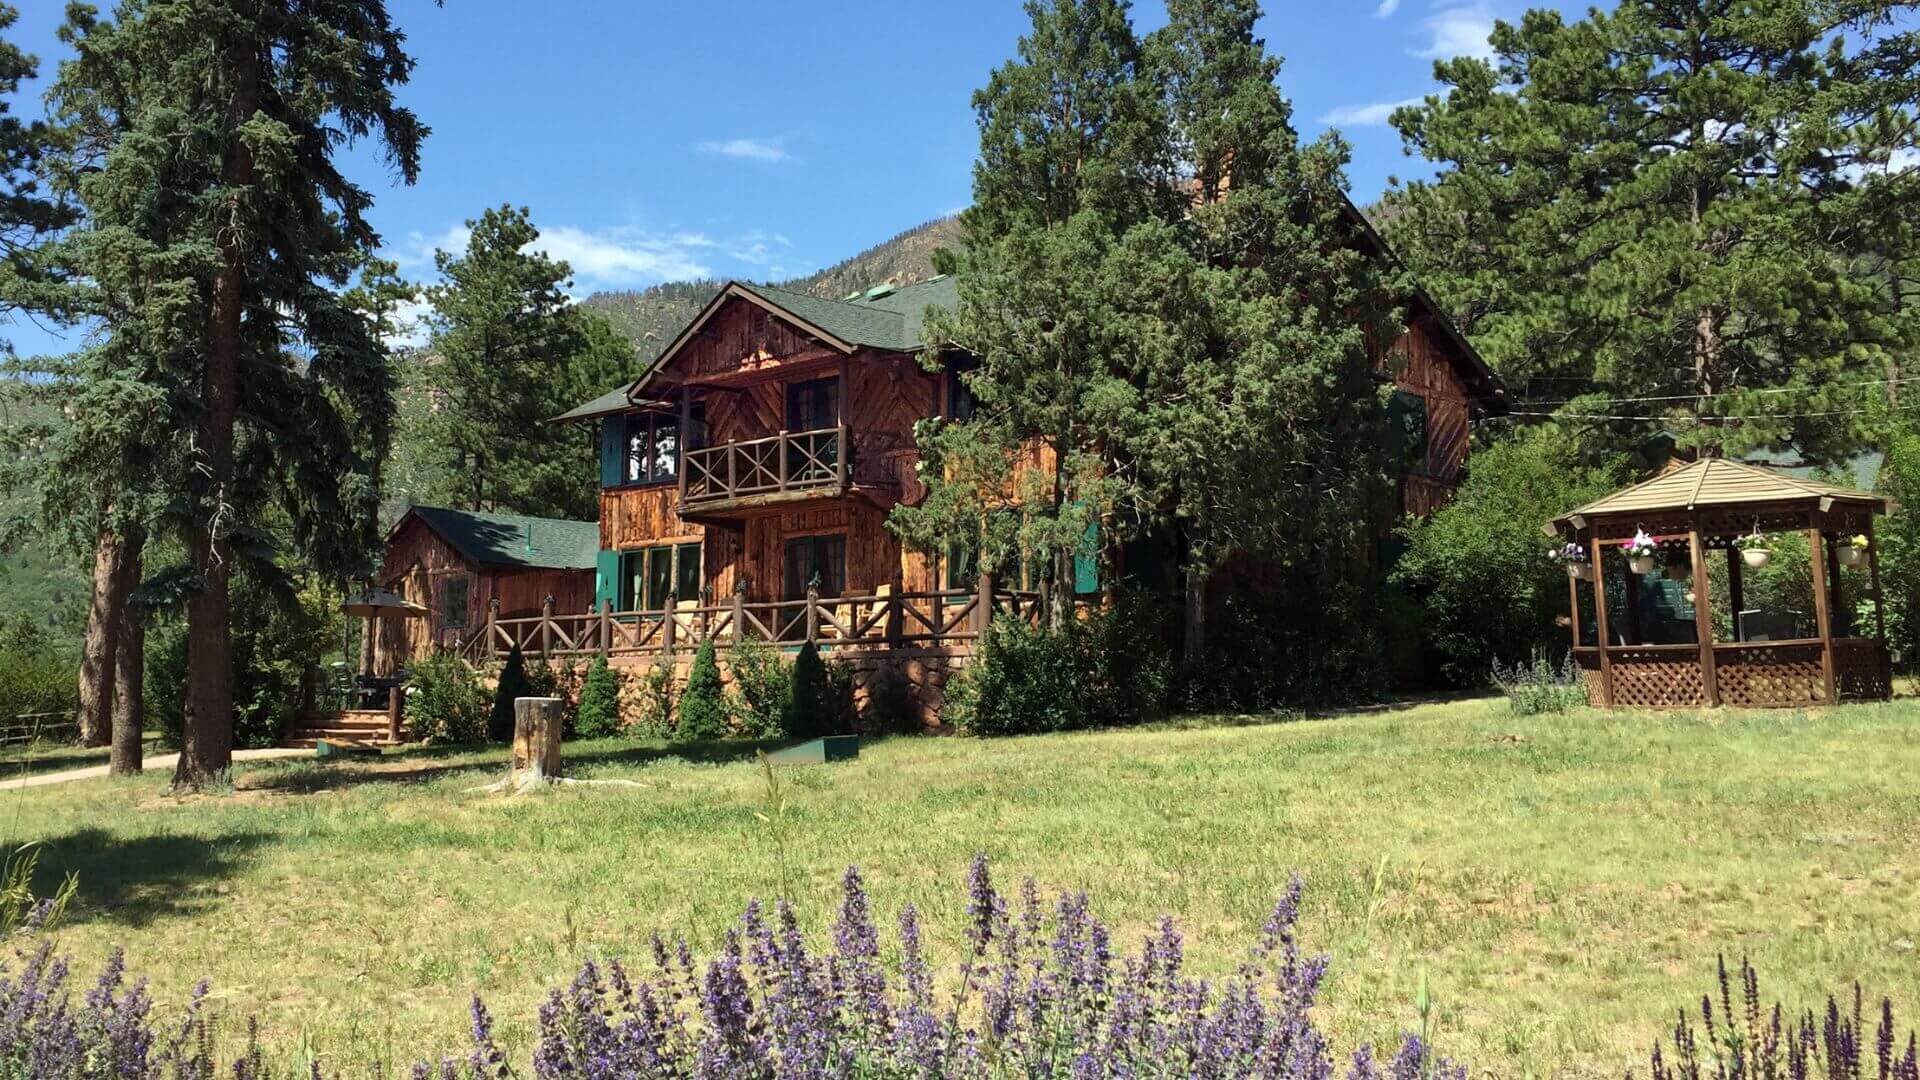 Large log sided lodge surrounded by pine trees, green grass, purple flowers, and blue skies